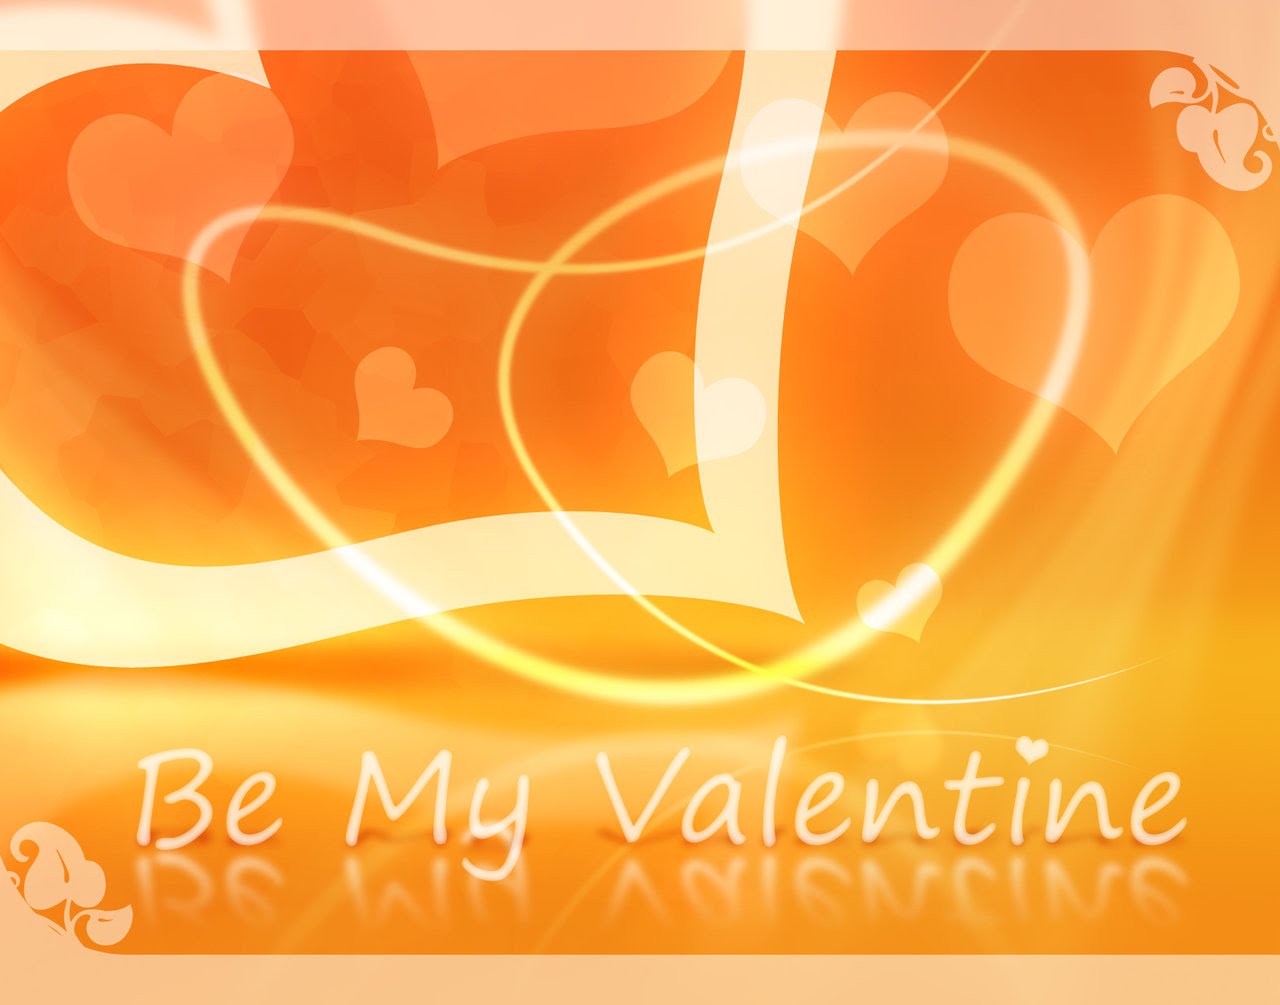 Be My Valentine Wallpaper By Vathanx Very Beautiful